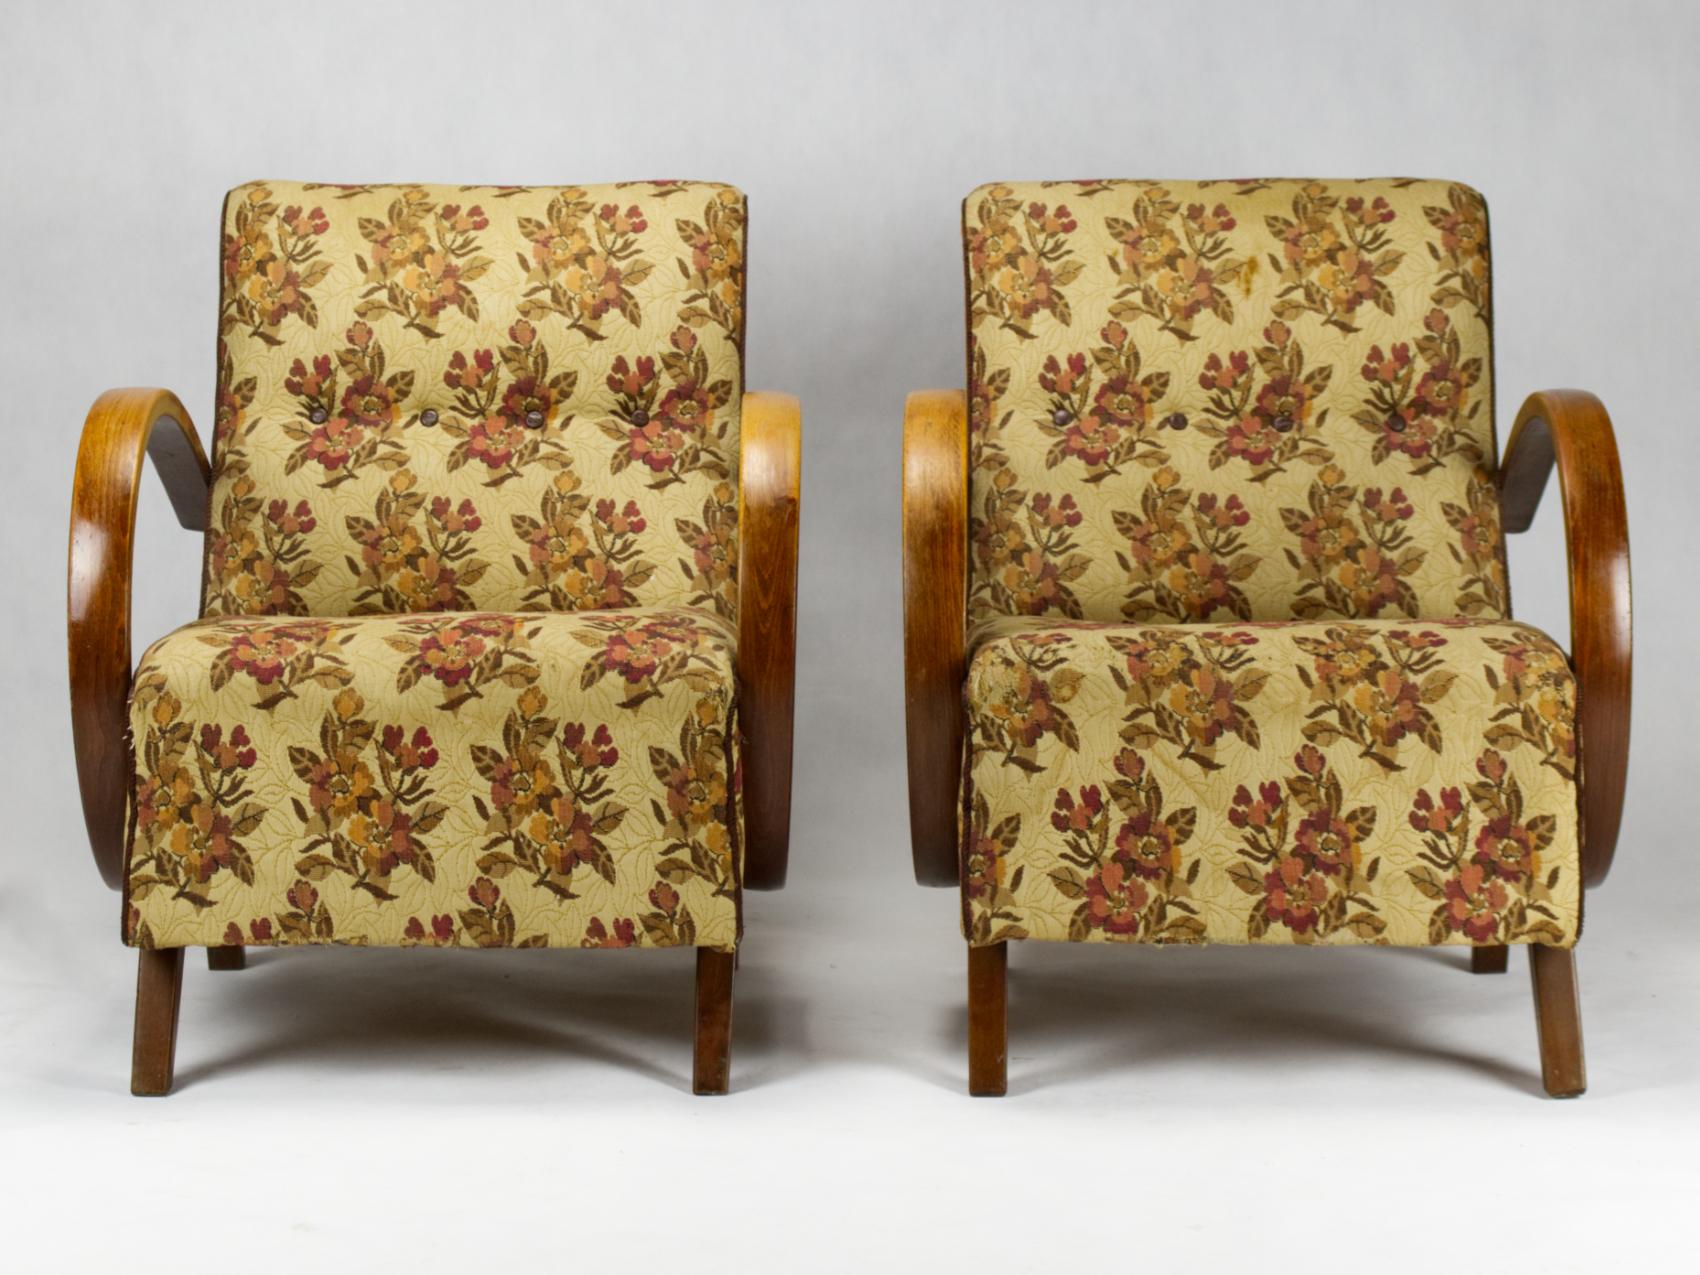 This lounge chairs, model C, were designed by Jindrich Halabala and produced in former Czechoslovakia in the 1930s by UP Zavody Brno. The chairs features curved armrests and legs made from stained beech and are upholstered in original fabric. The